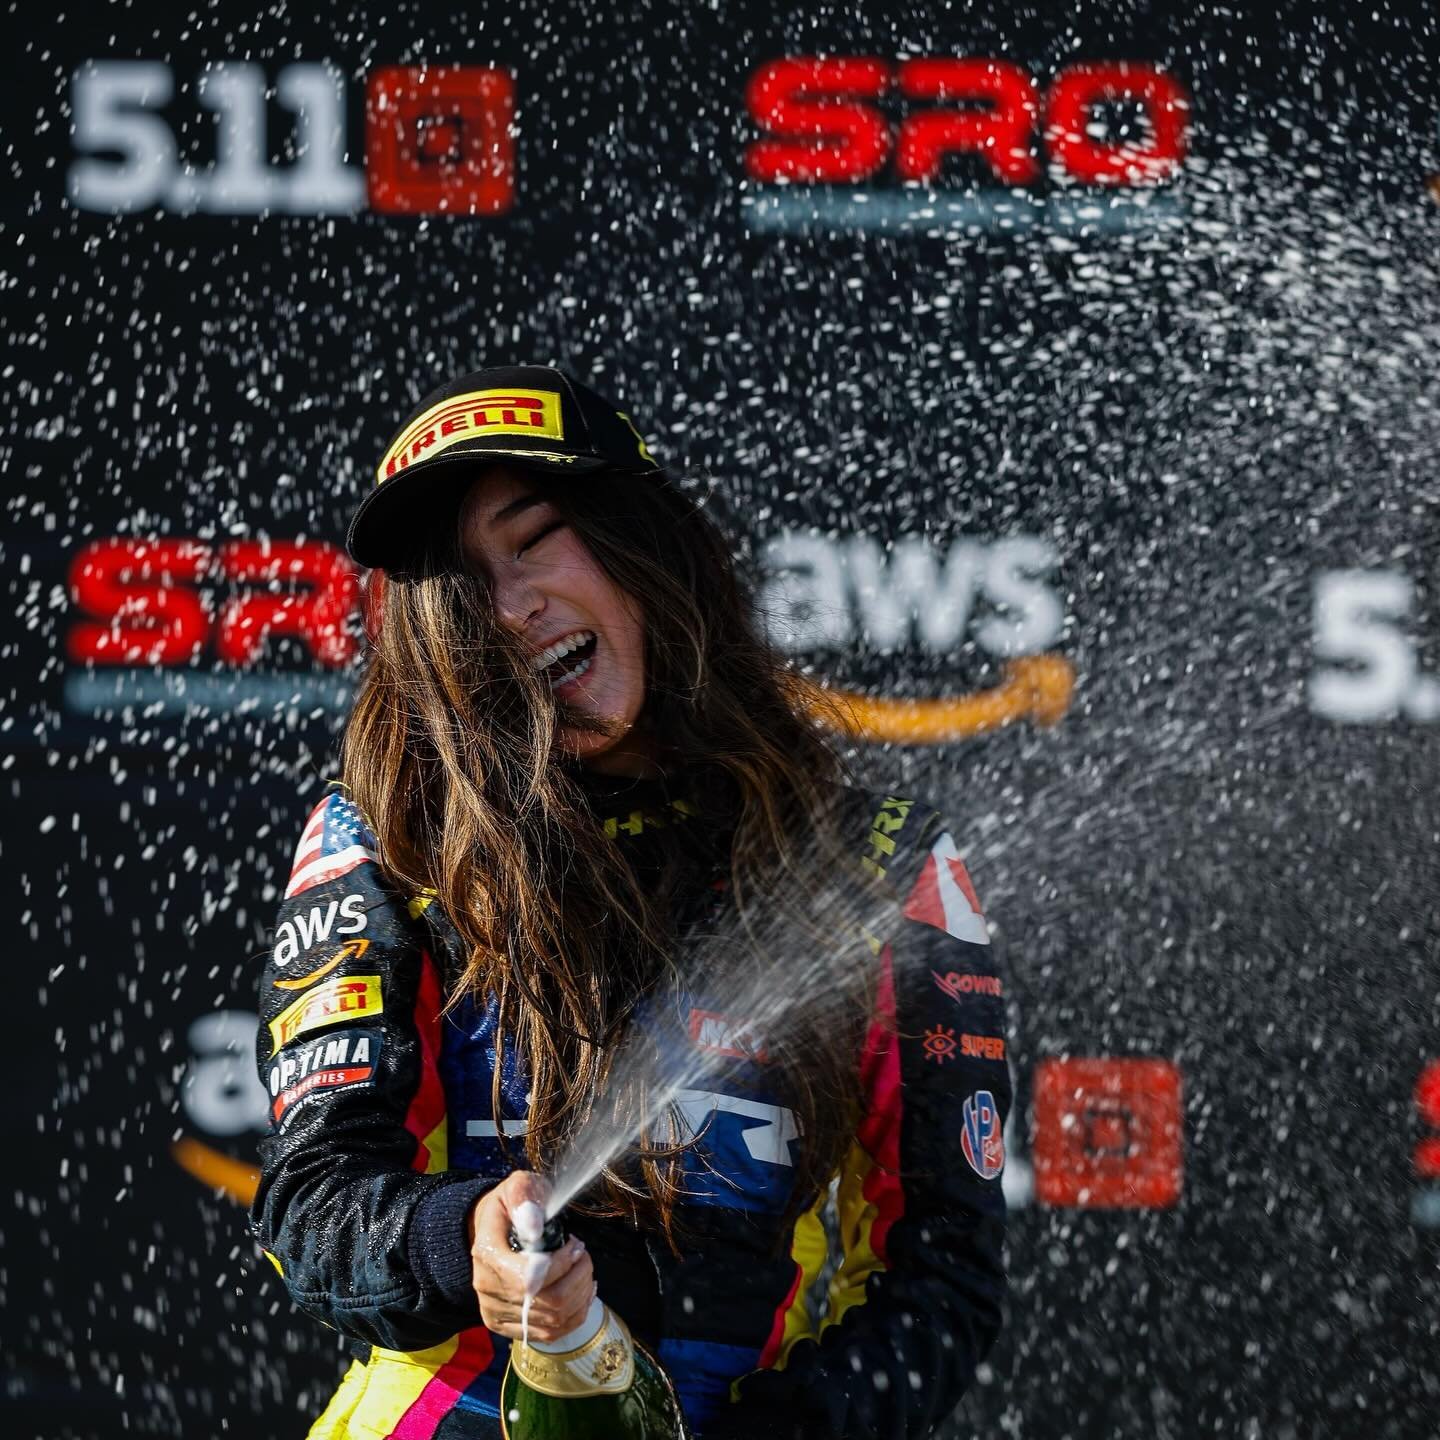 P2 at Long Beach for @samanthaatan last weekend in the M4 GT4! 🌴🥈 @gt_america 

Excited to be back in Sebring with @gtworldchallengeamerica and our M4 GT3s this weekend fighting for the top step of the podium 💪